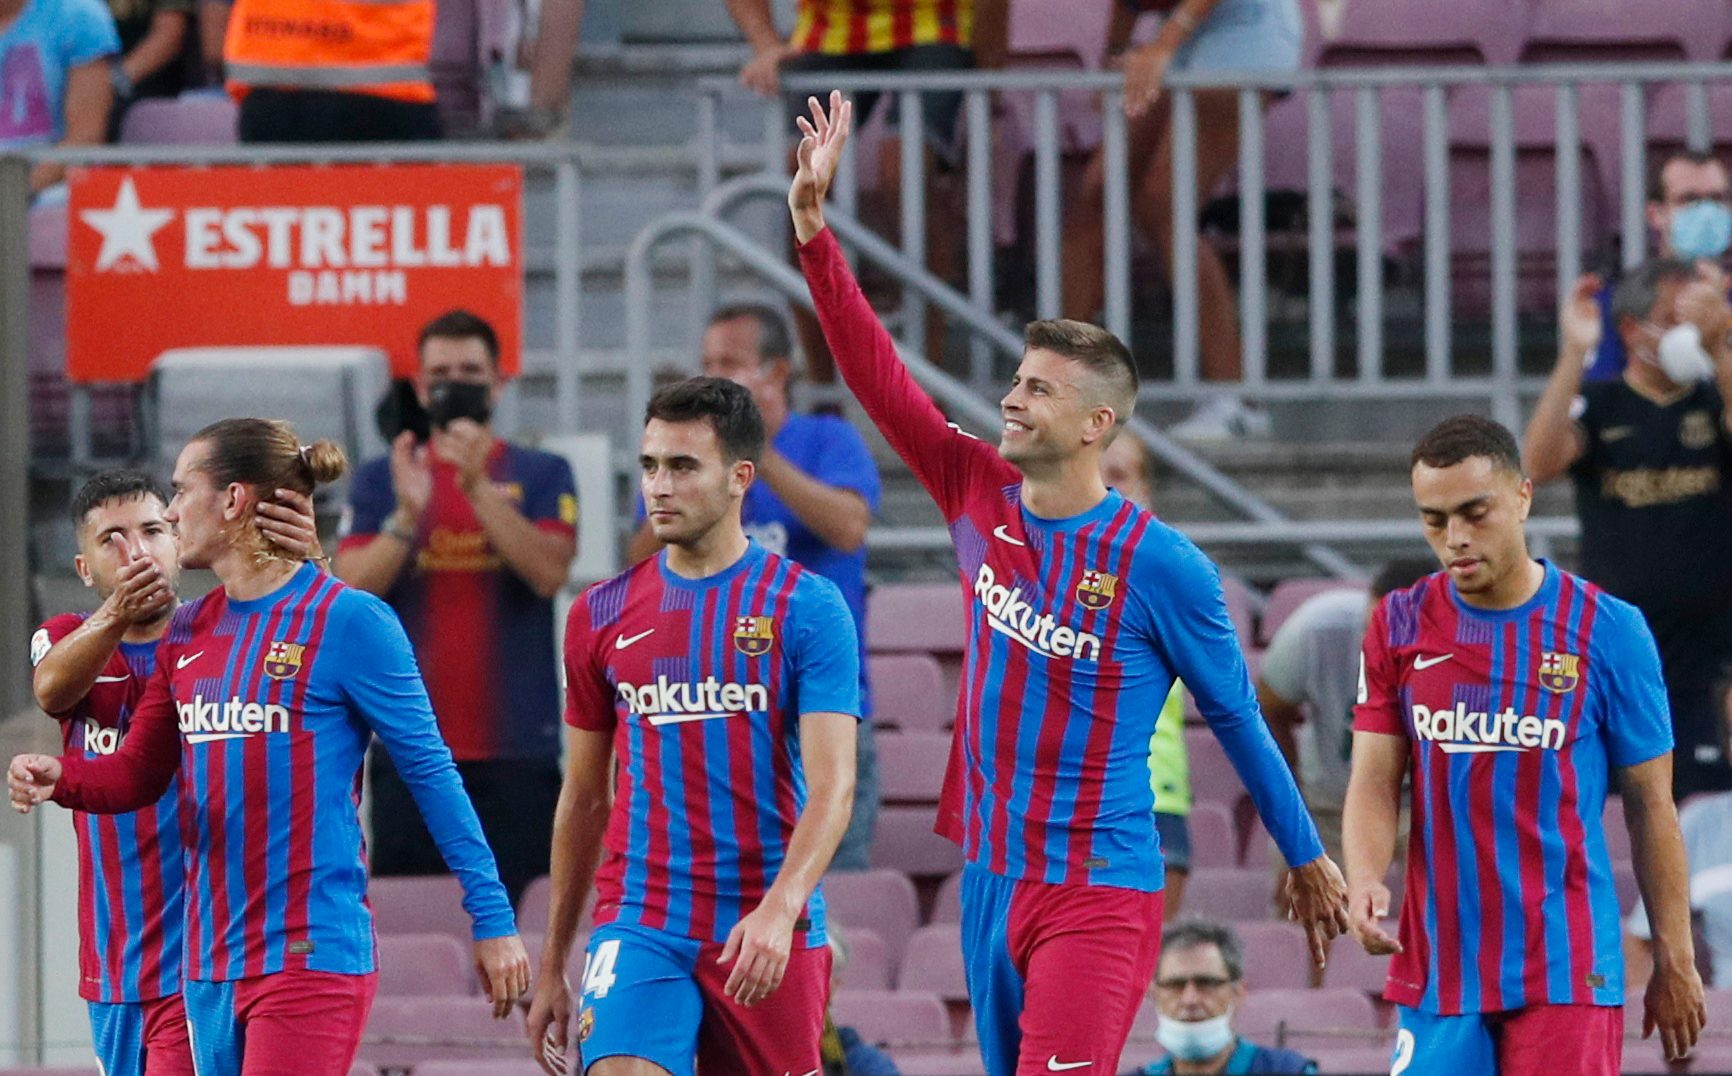 Barcelona sinks Real Sociedad in 1st game without Messi